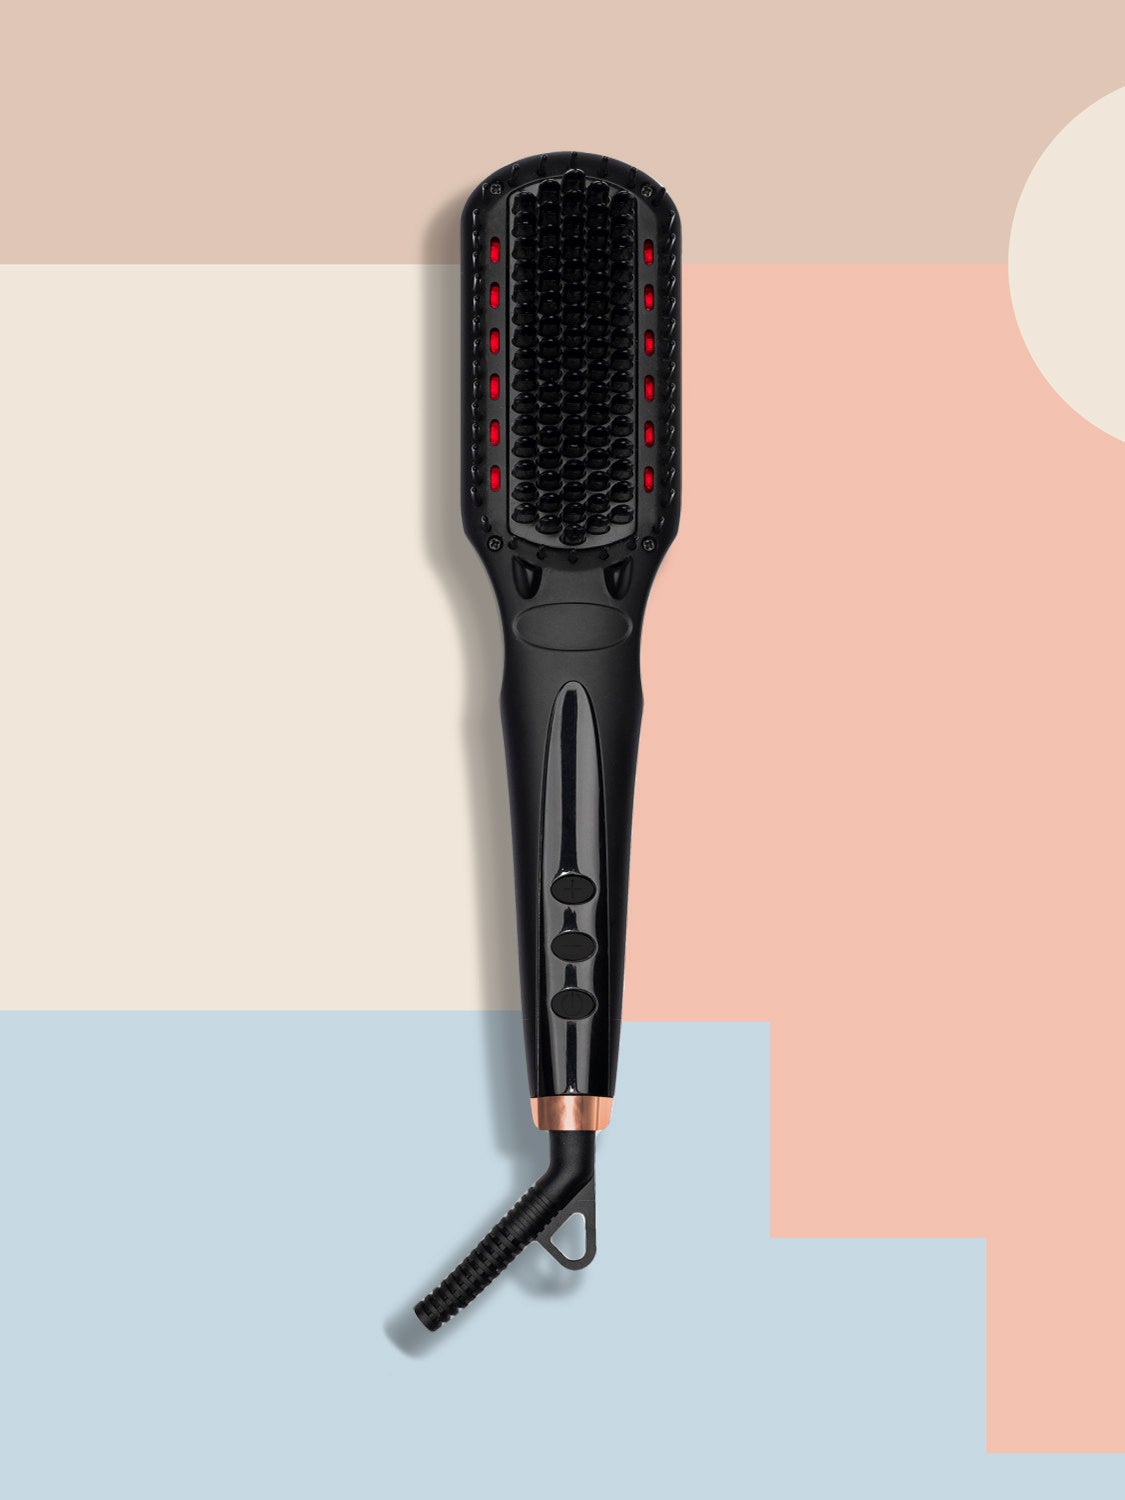 Infrared Hair Straighteners Promise Silkier Locks—But Do They Work?